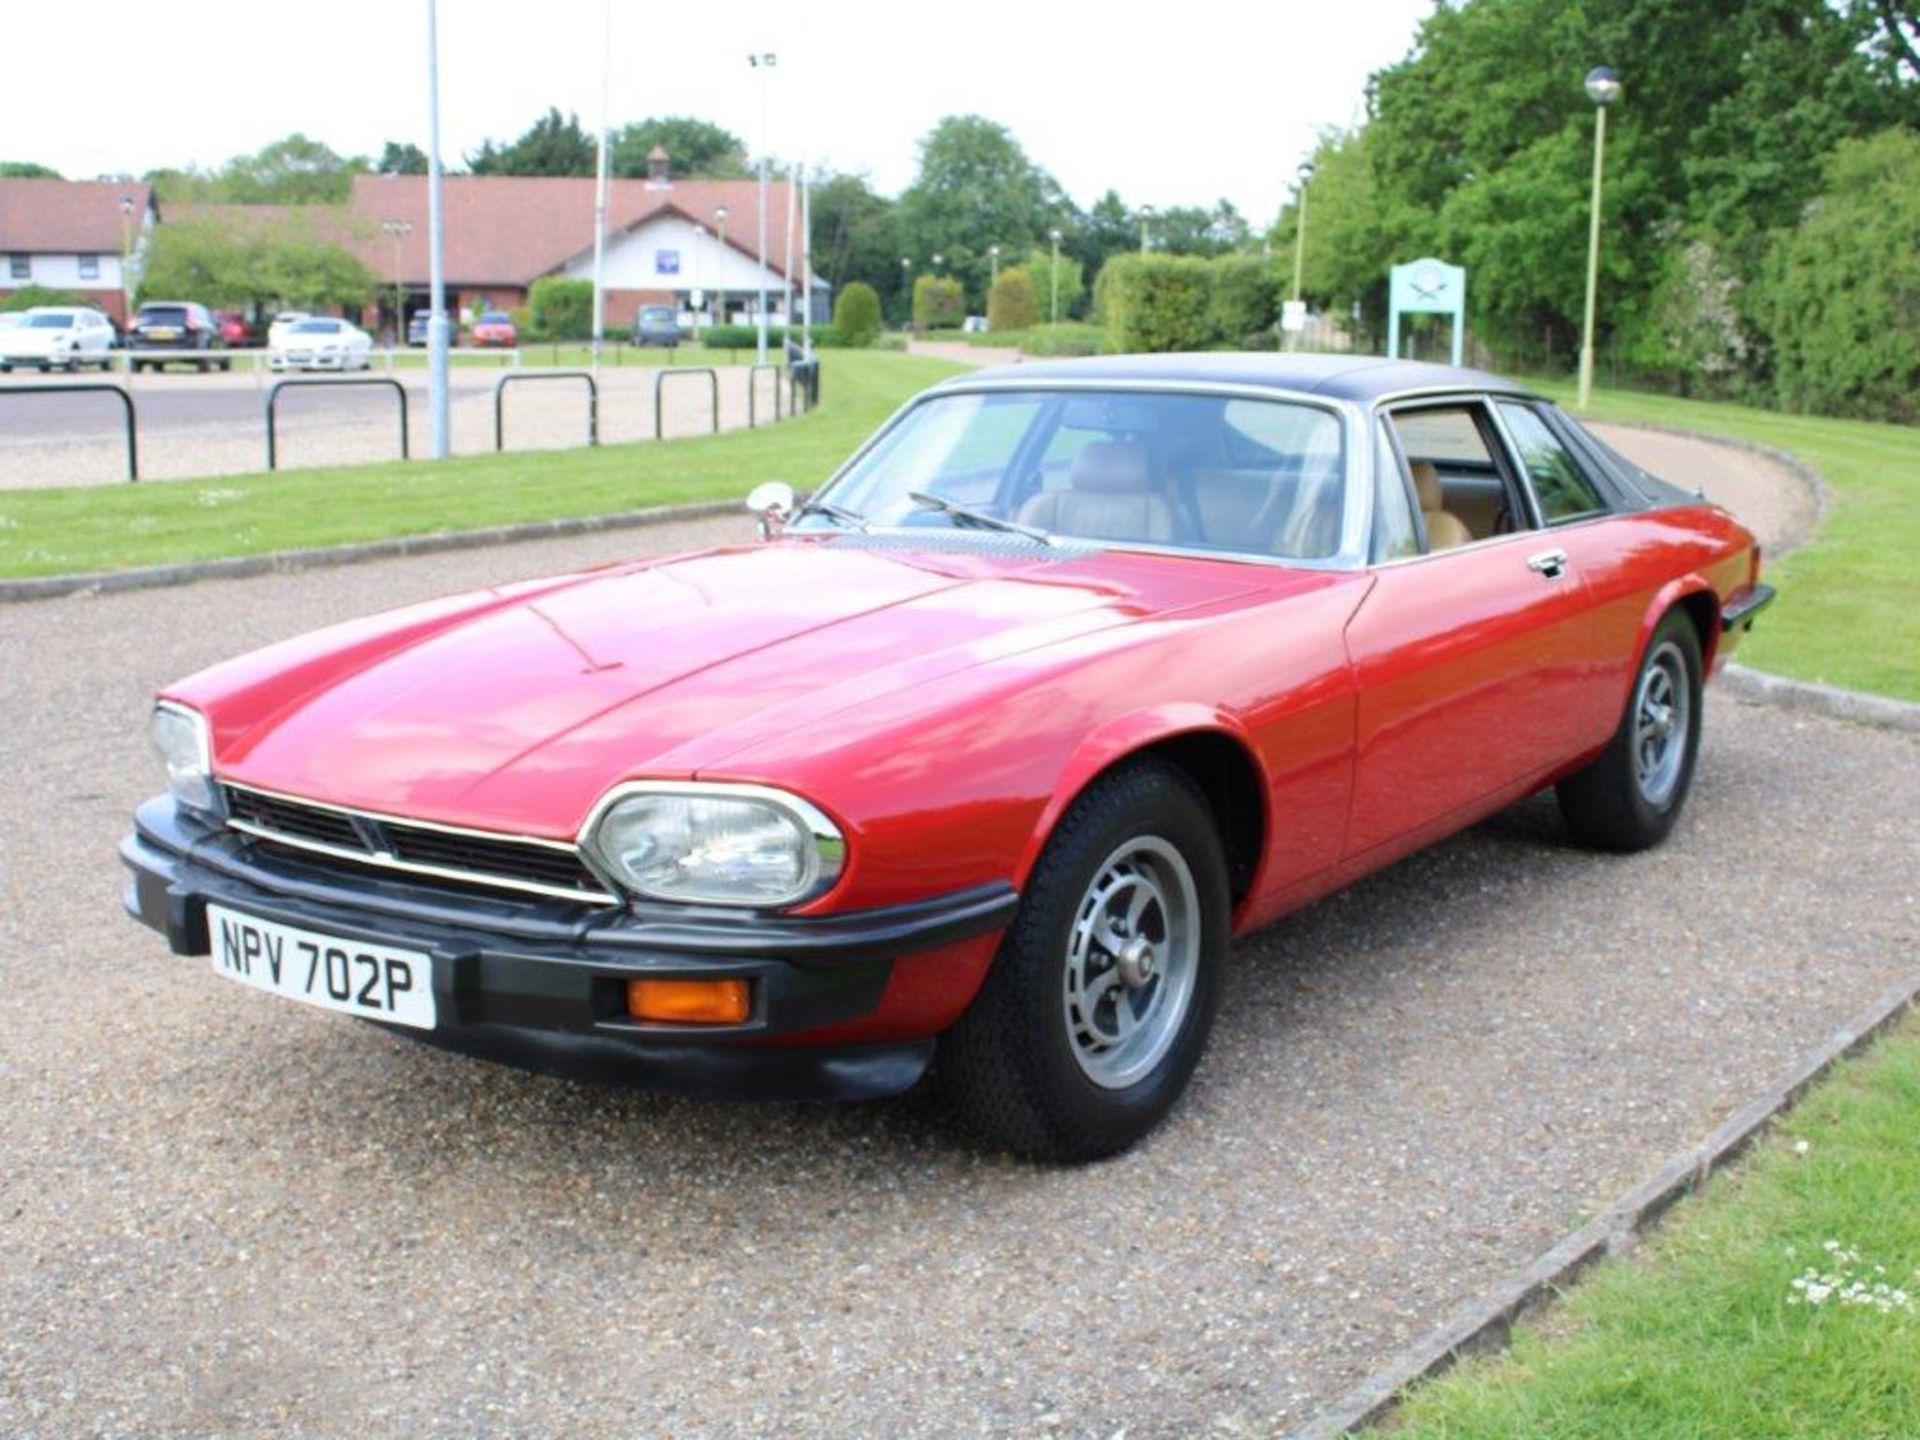 1976 Jaguar XJ-S 5.3 V12 Coupe Auto 29,030 miles from new - Image 5 of 28